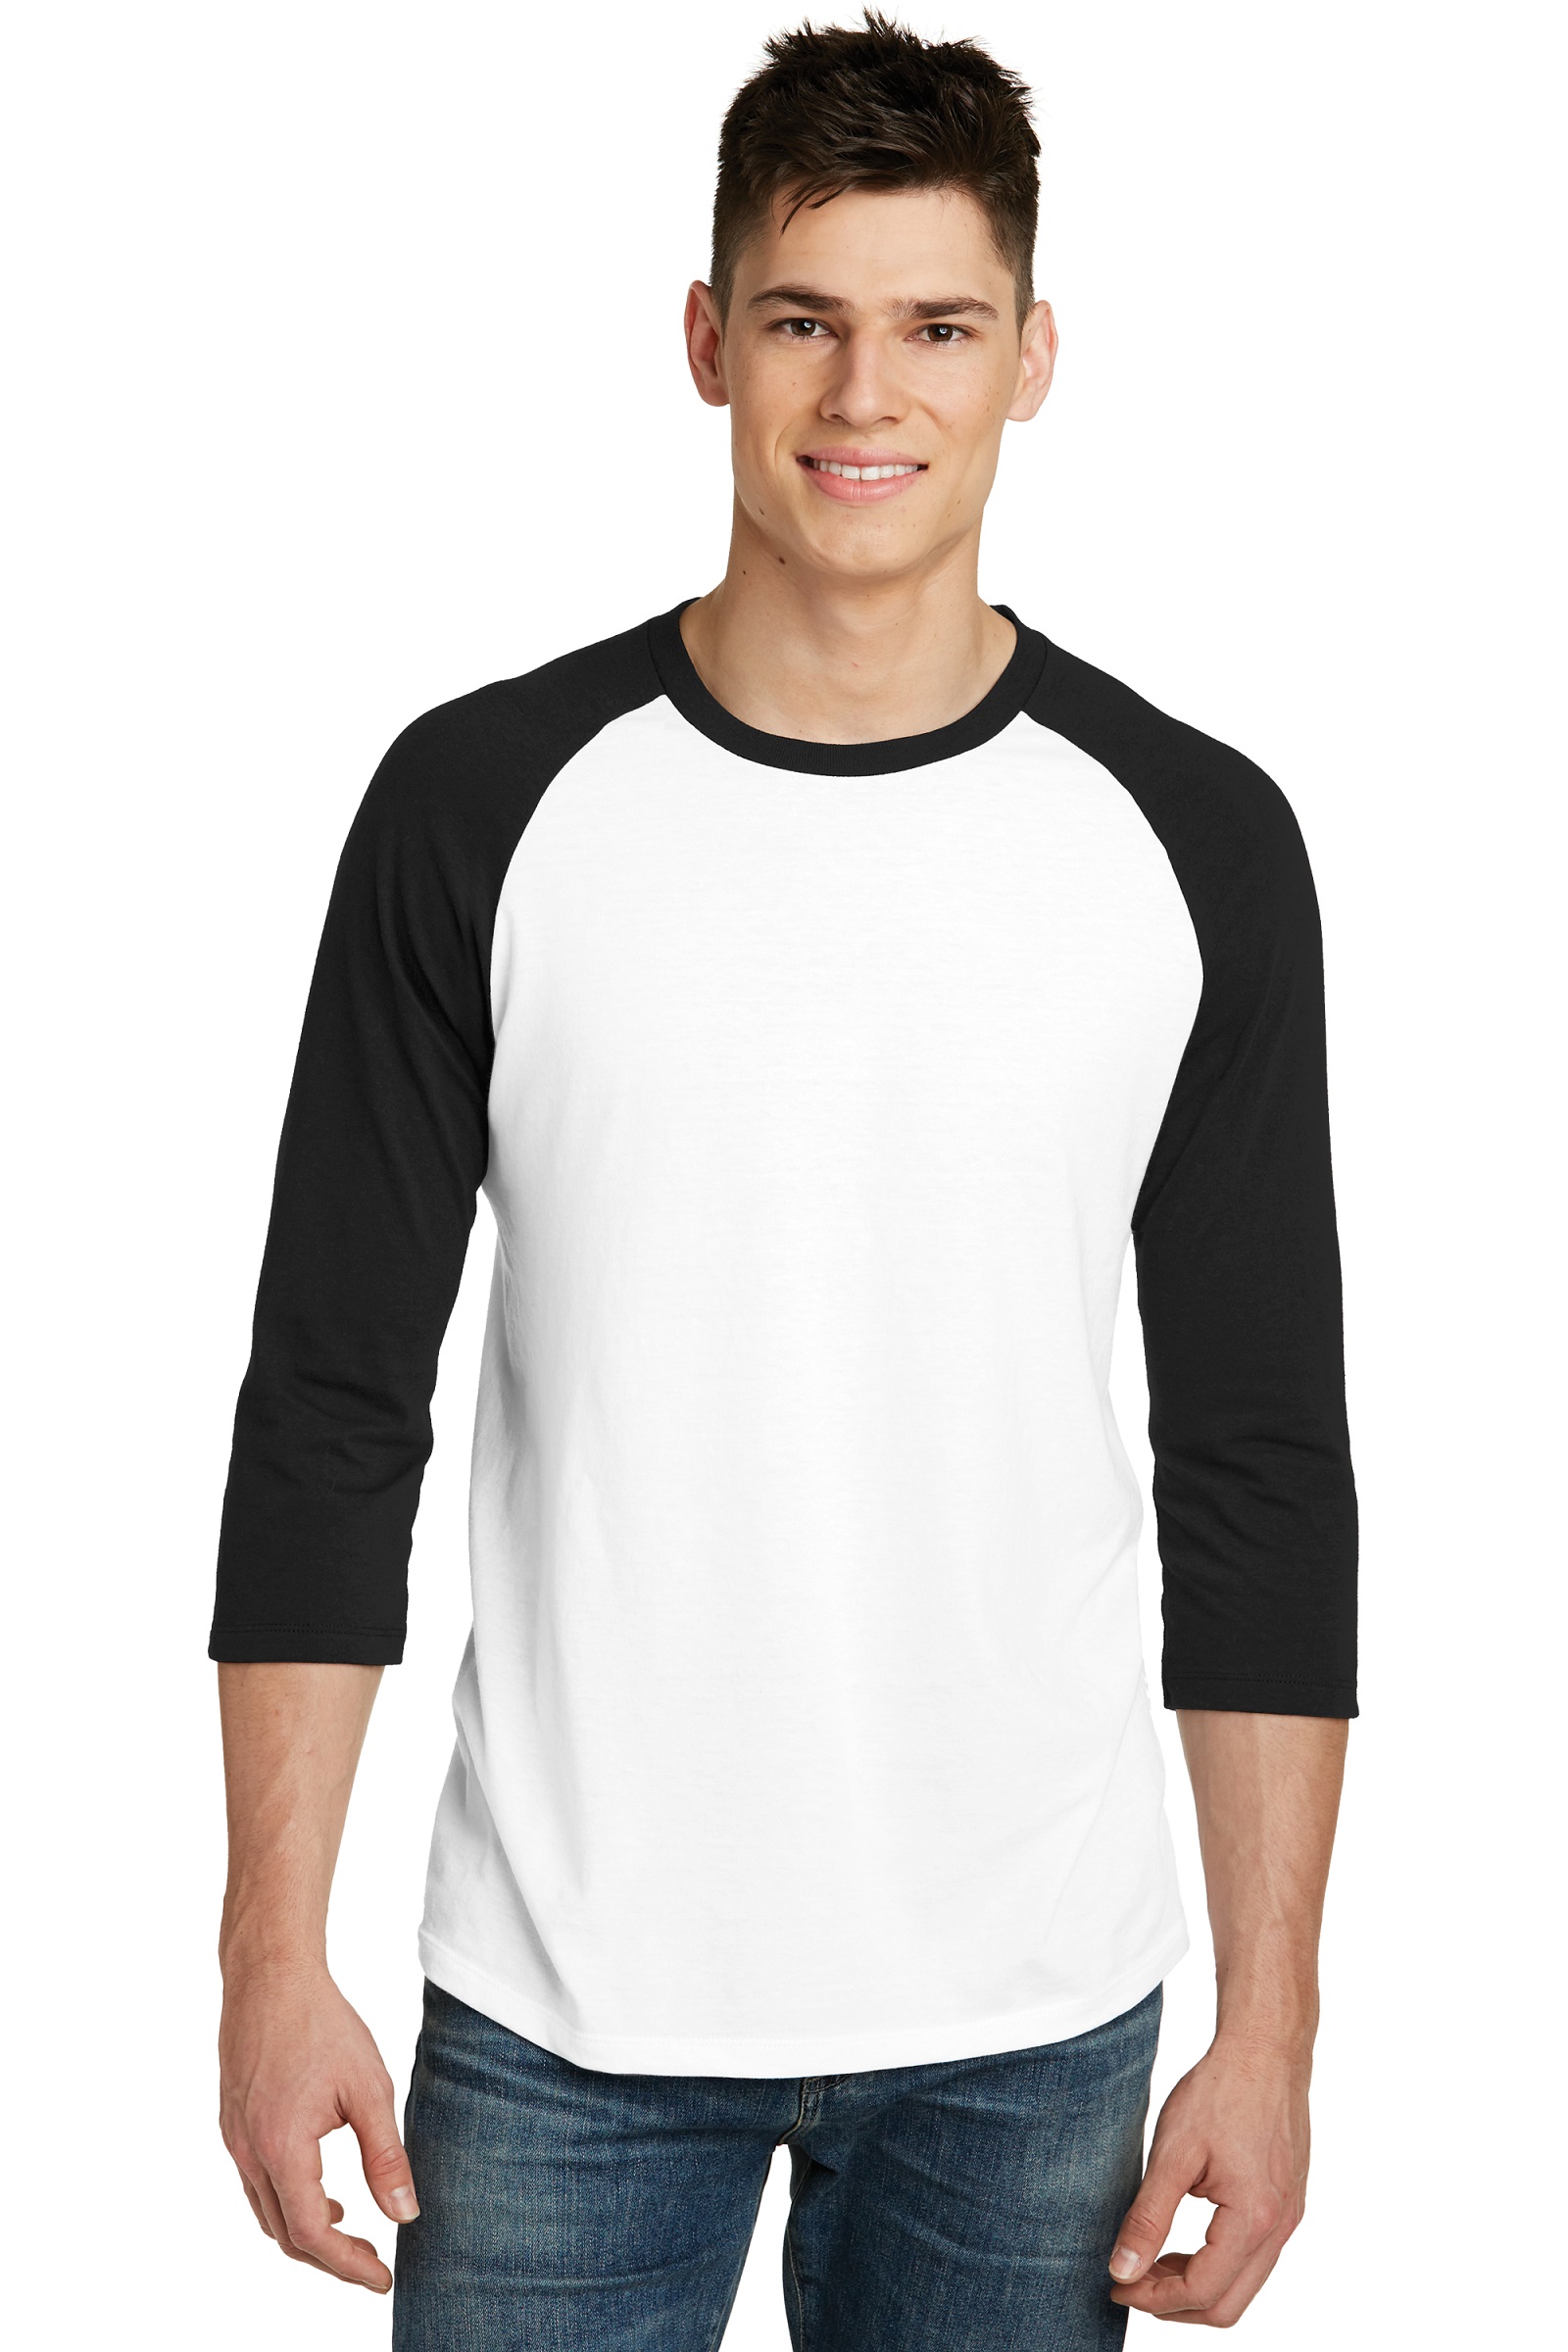 District Embroidered Very Important Tee  3/4-Sleeve Raglan